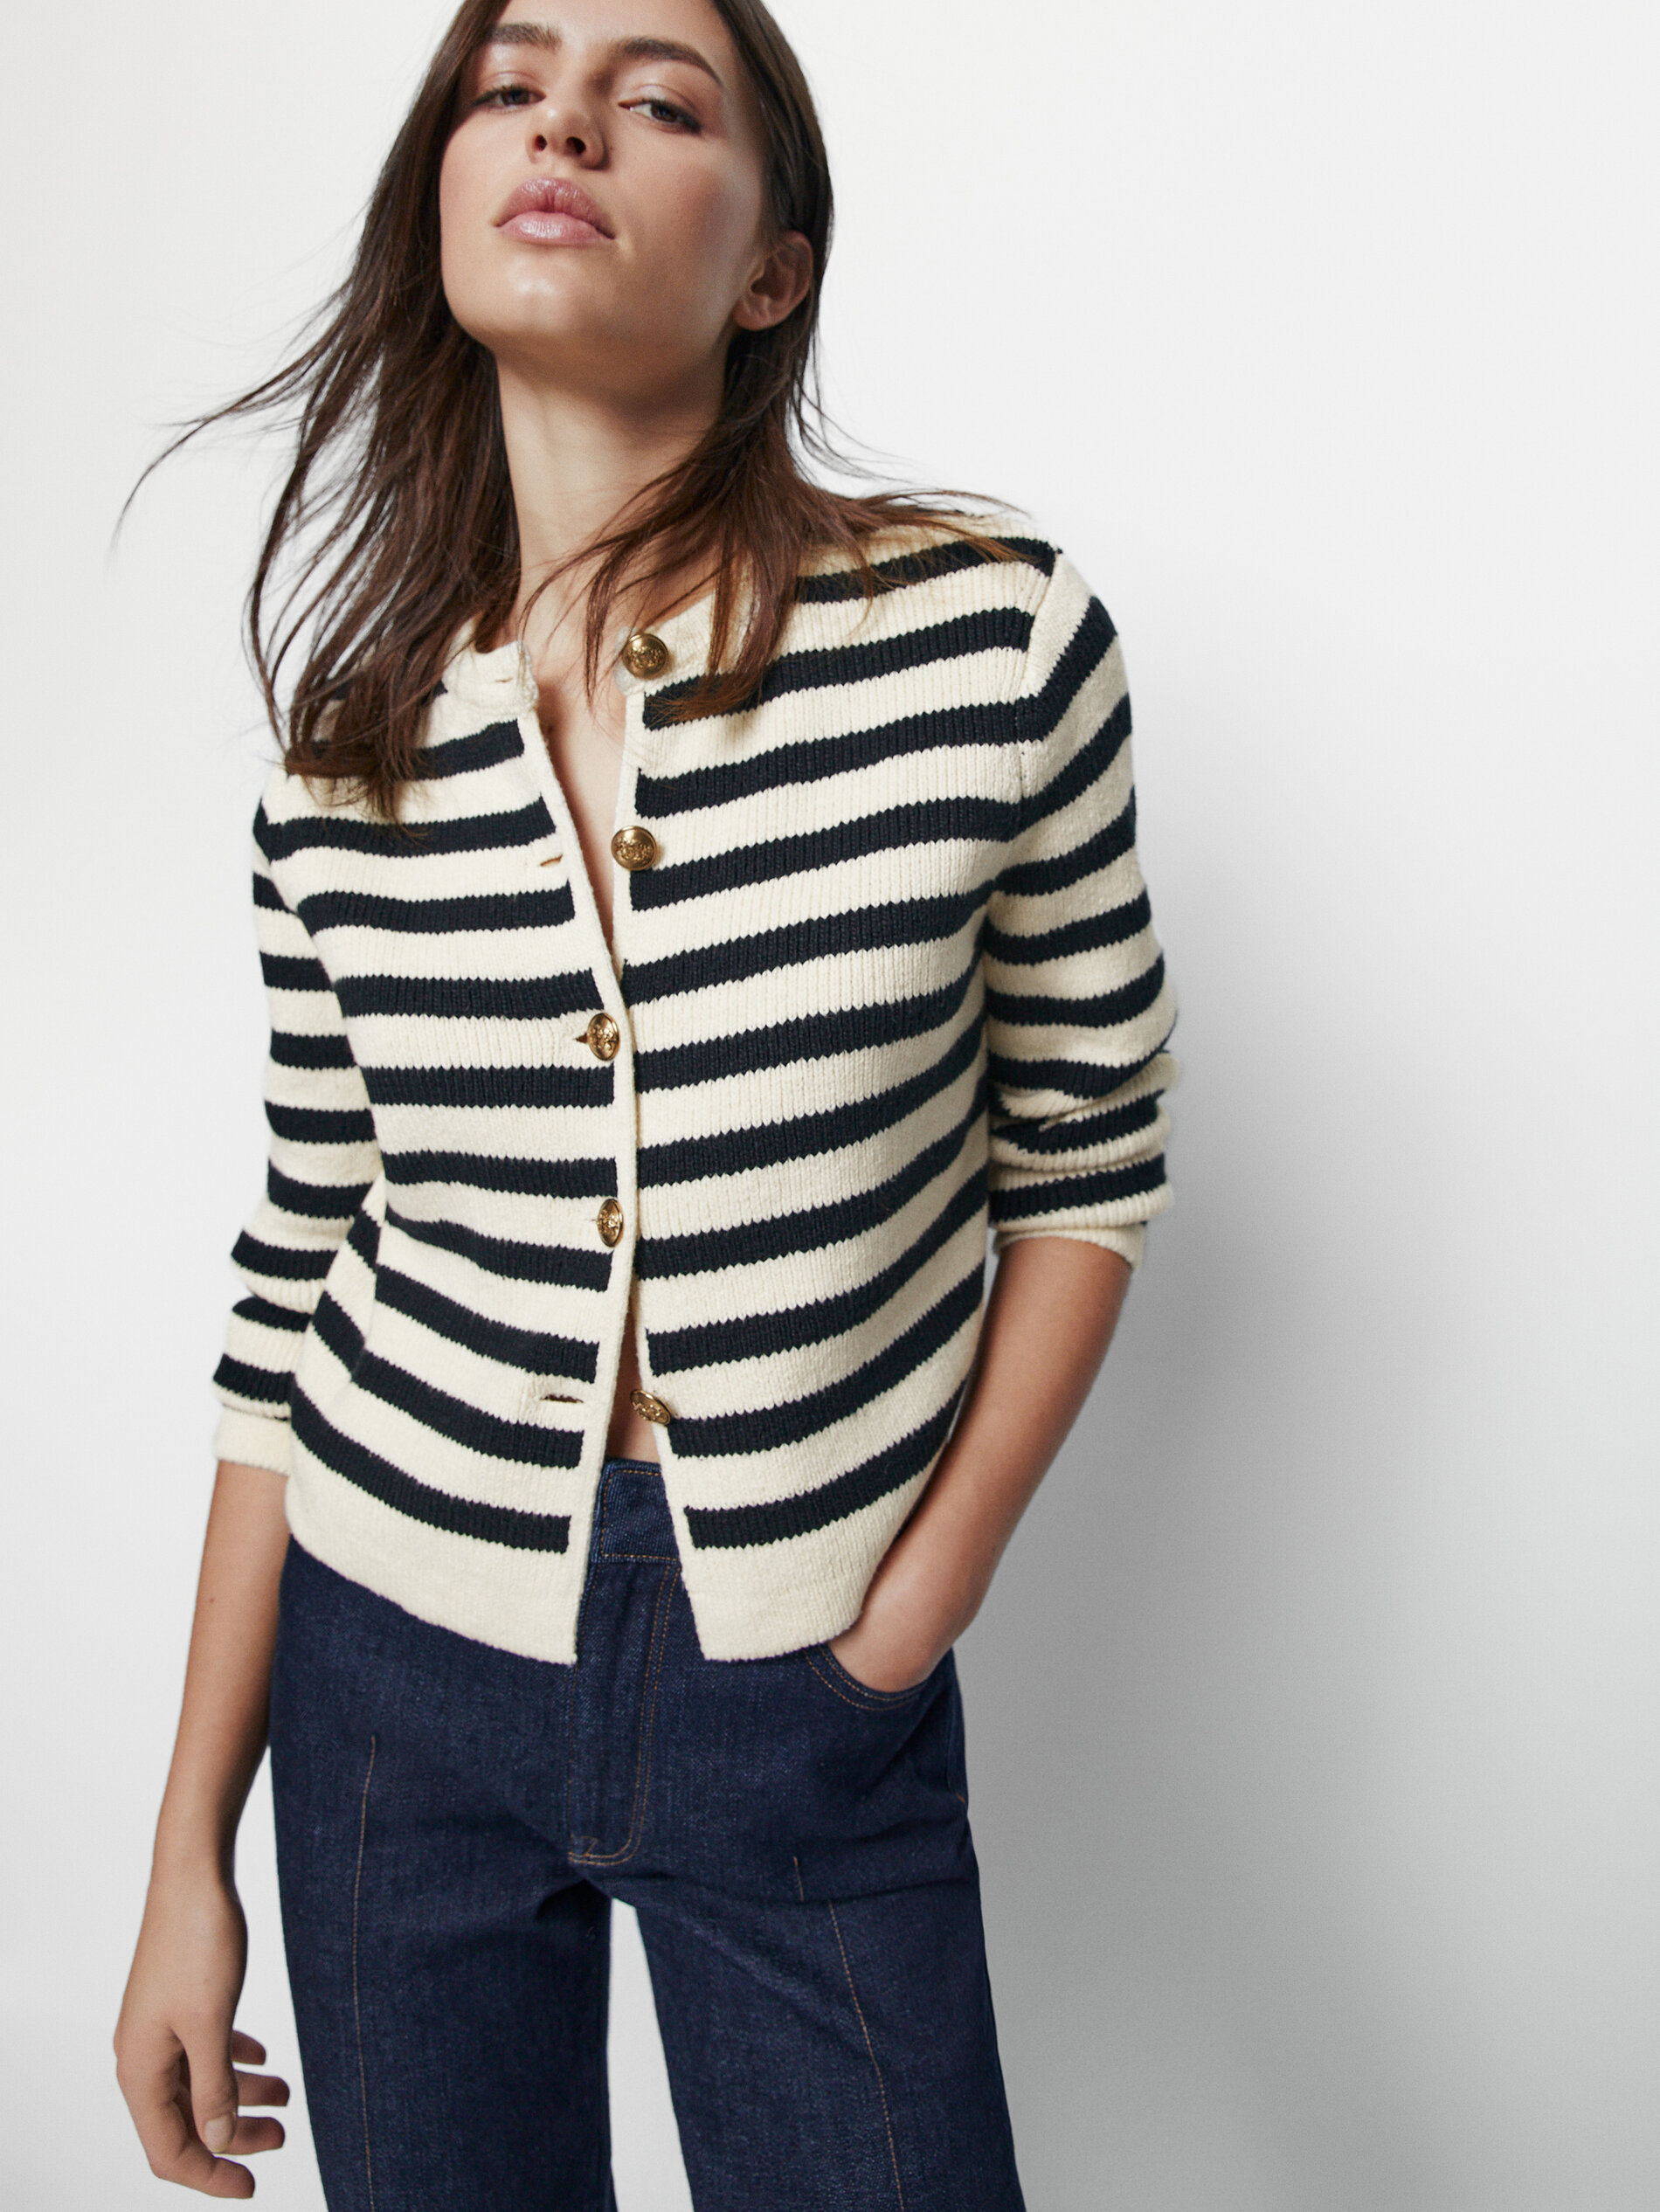 Massimo Dutti - Cardigan en maille rayures et boutons